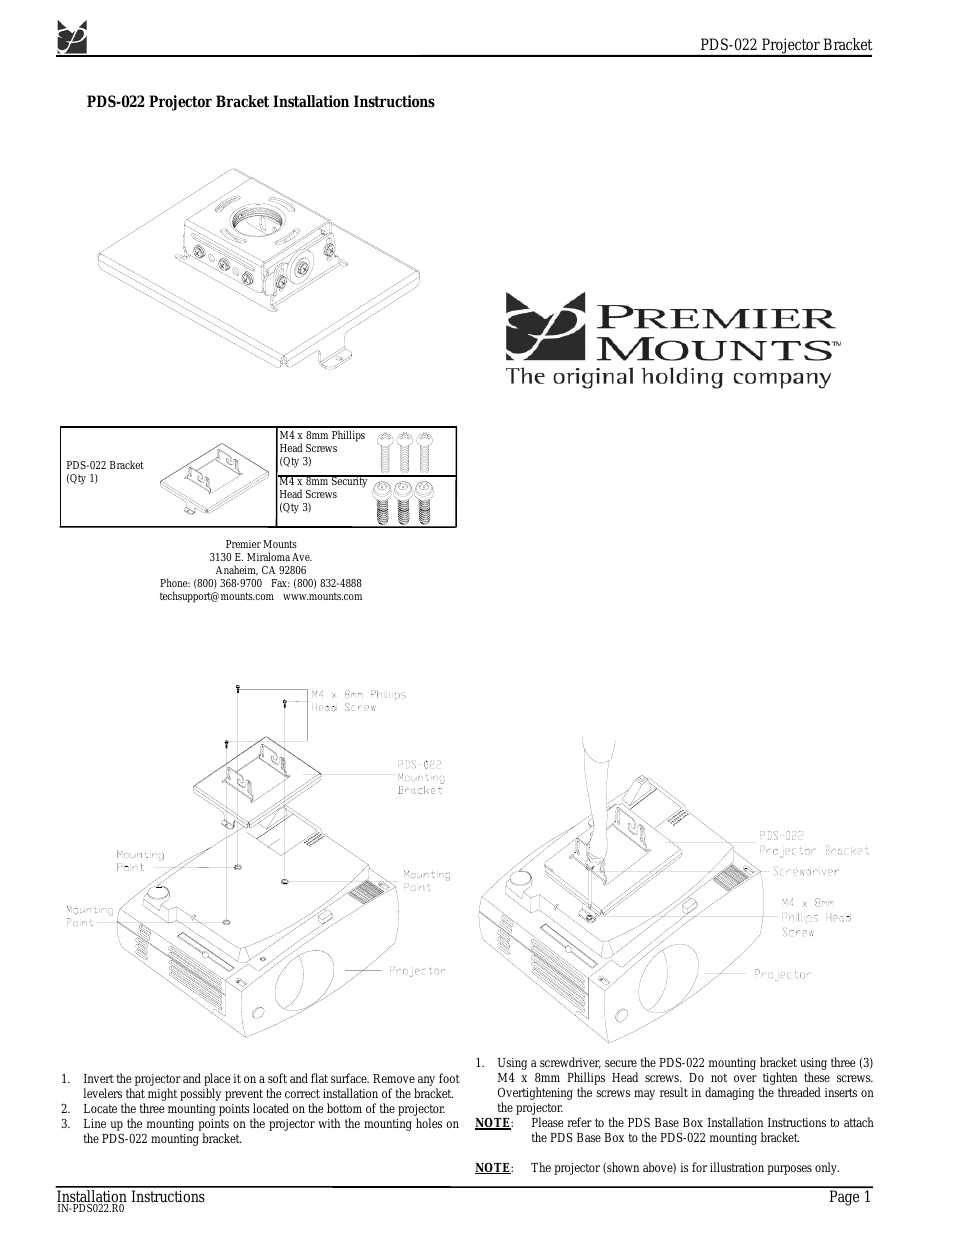 Low-Profile Dedicated Projector Mount PDS-022